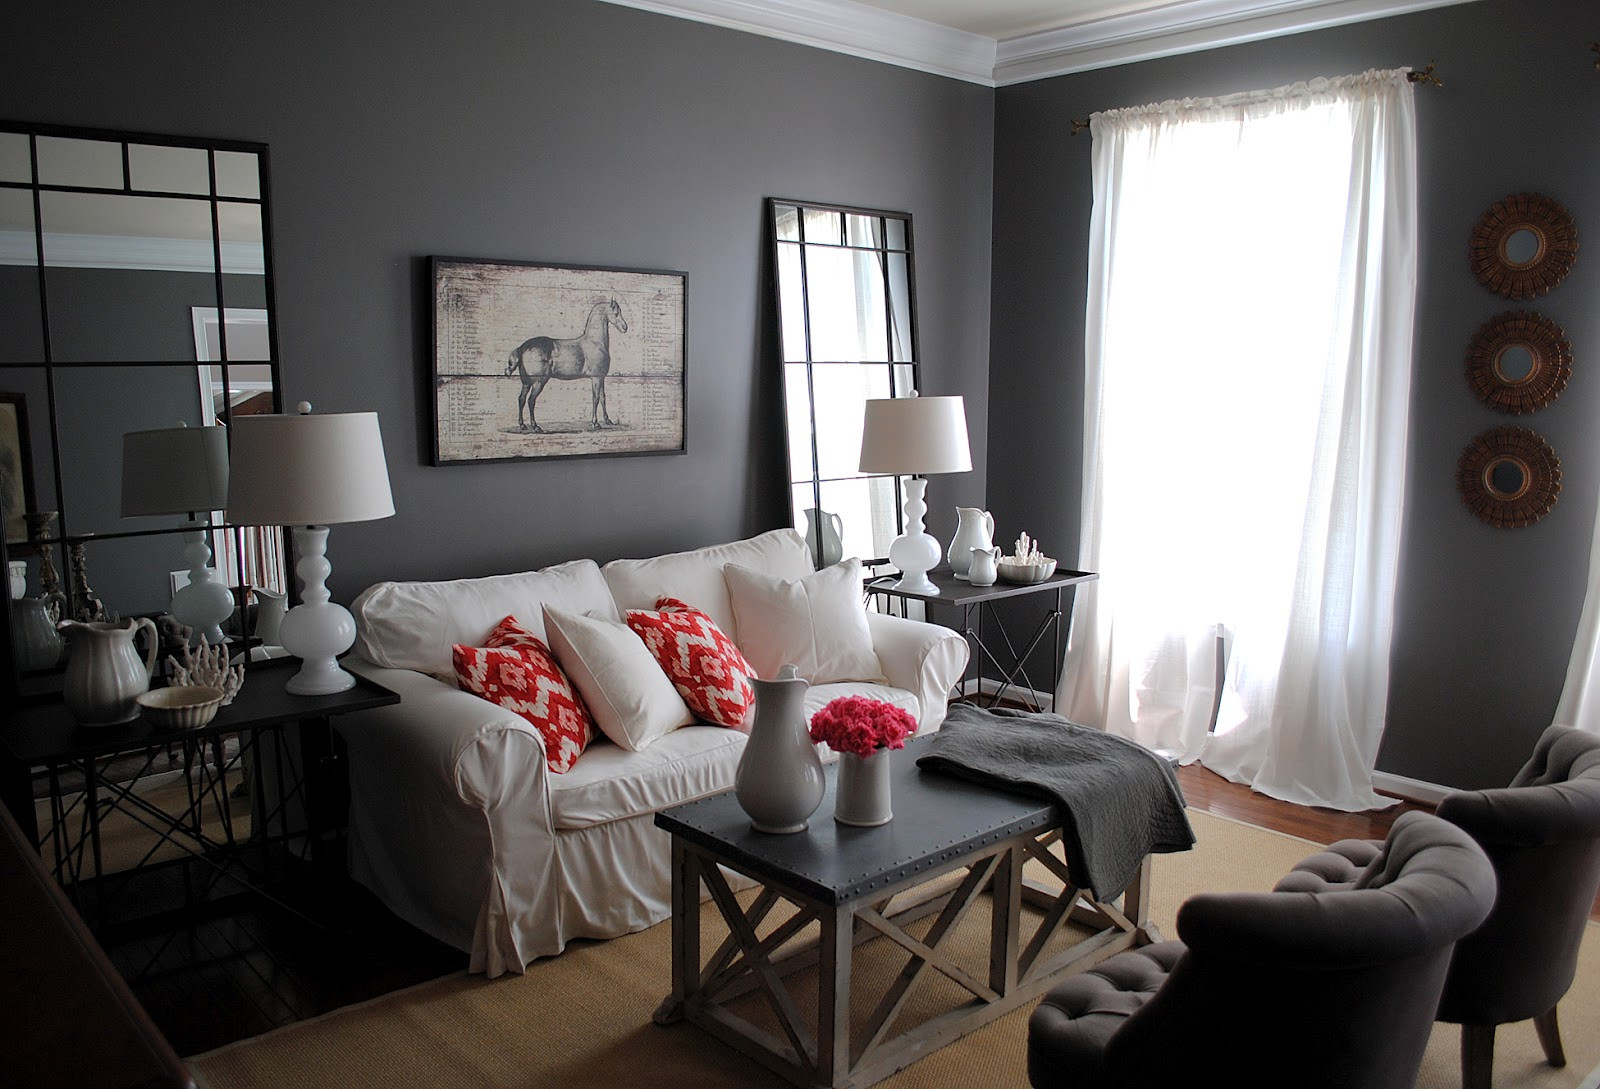 Grey Living Room Ideas
 My Living Room The Big Reveal & Huge Giveaway The